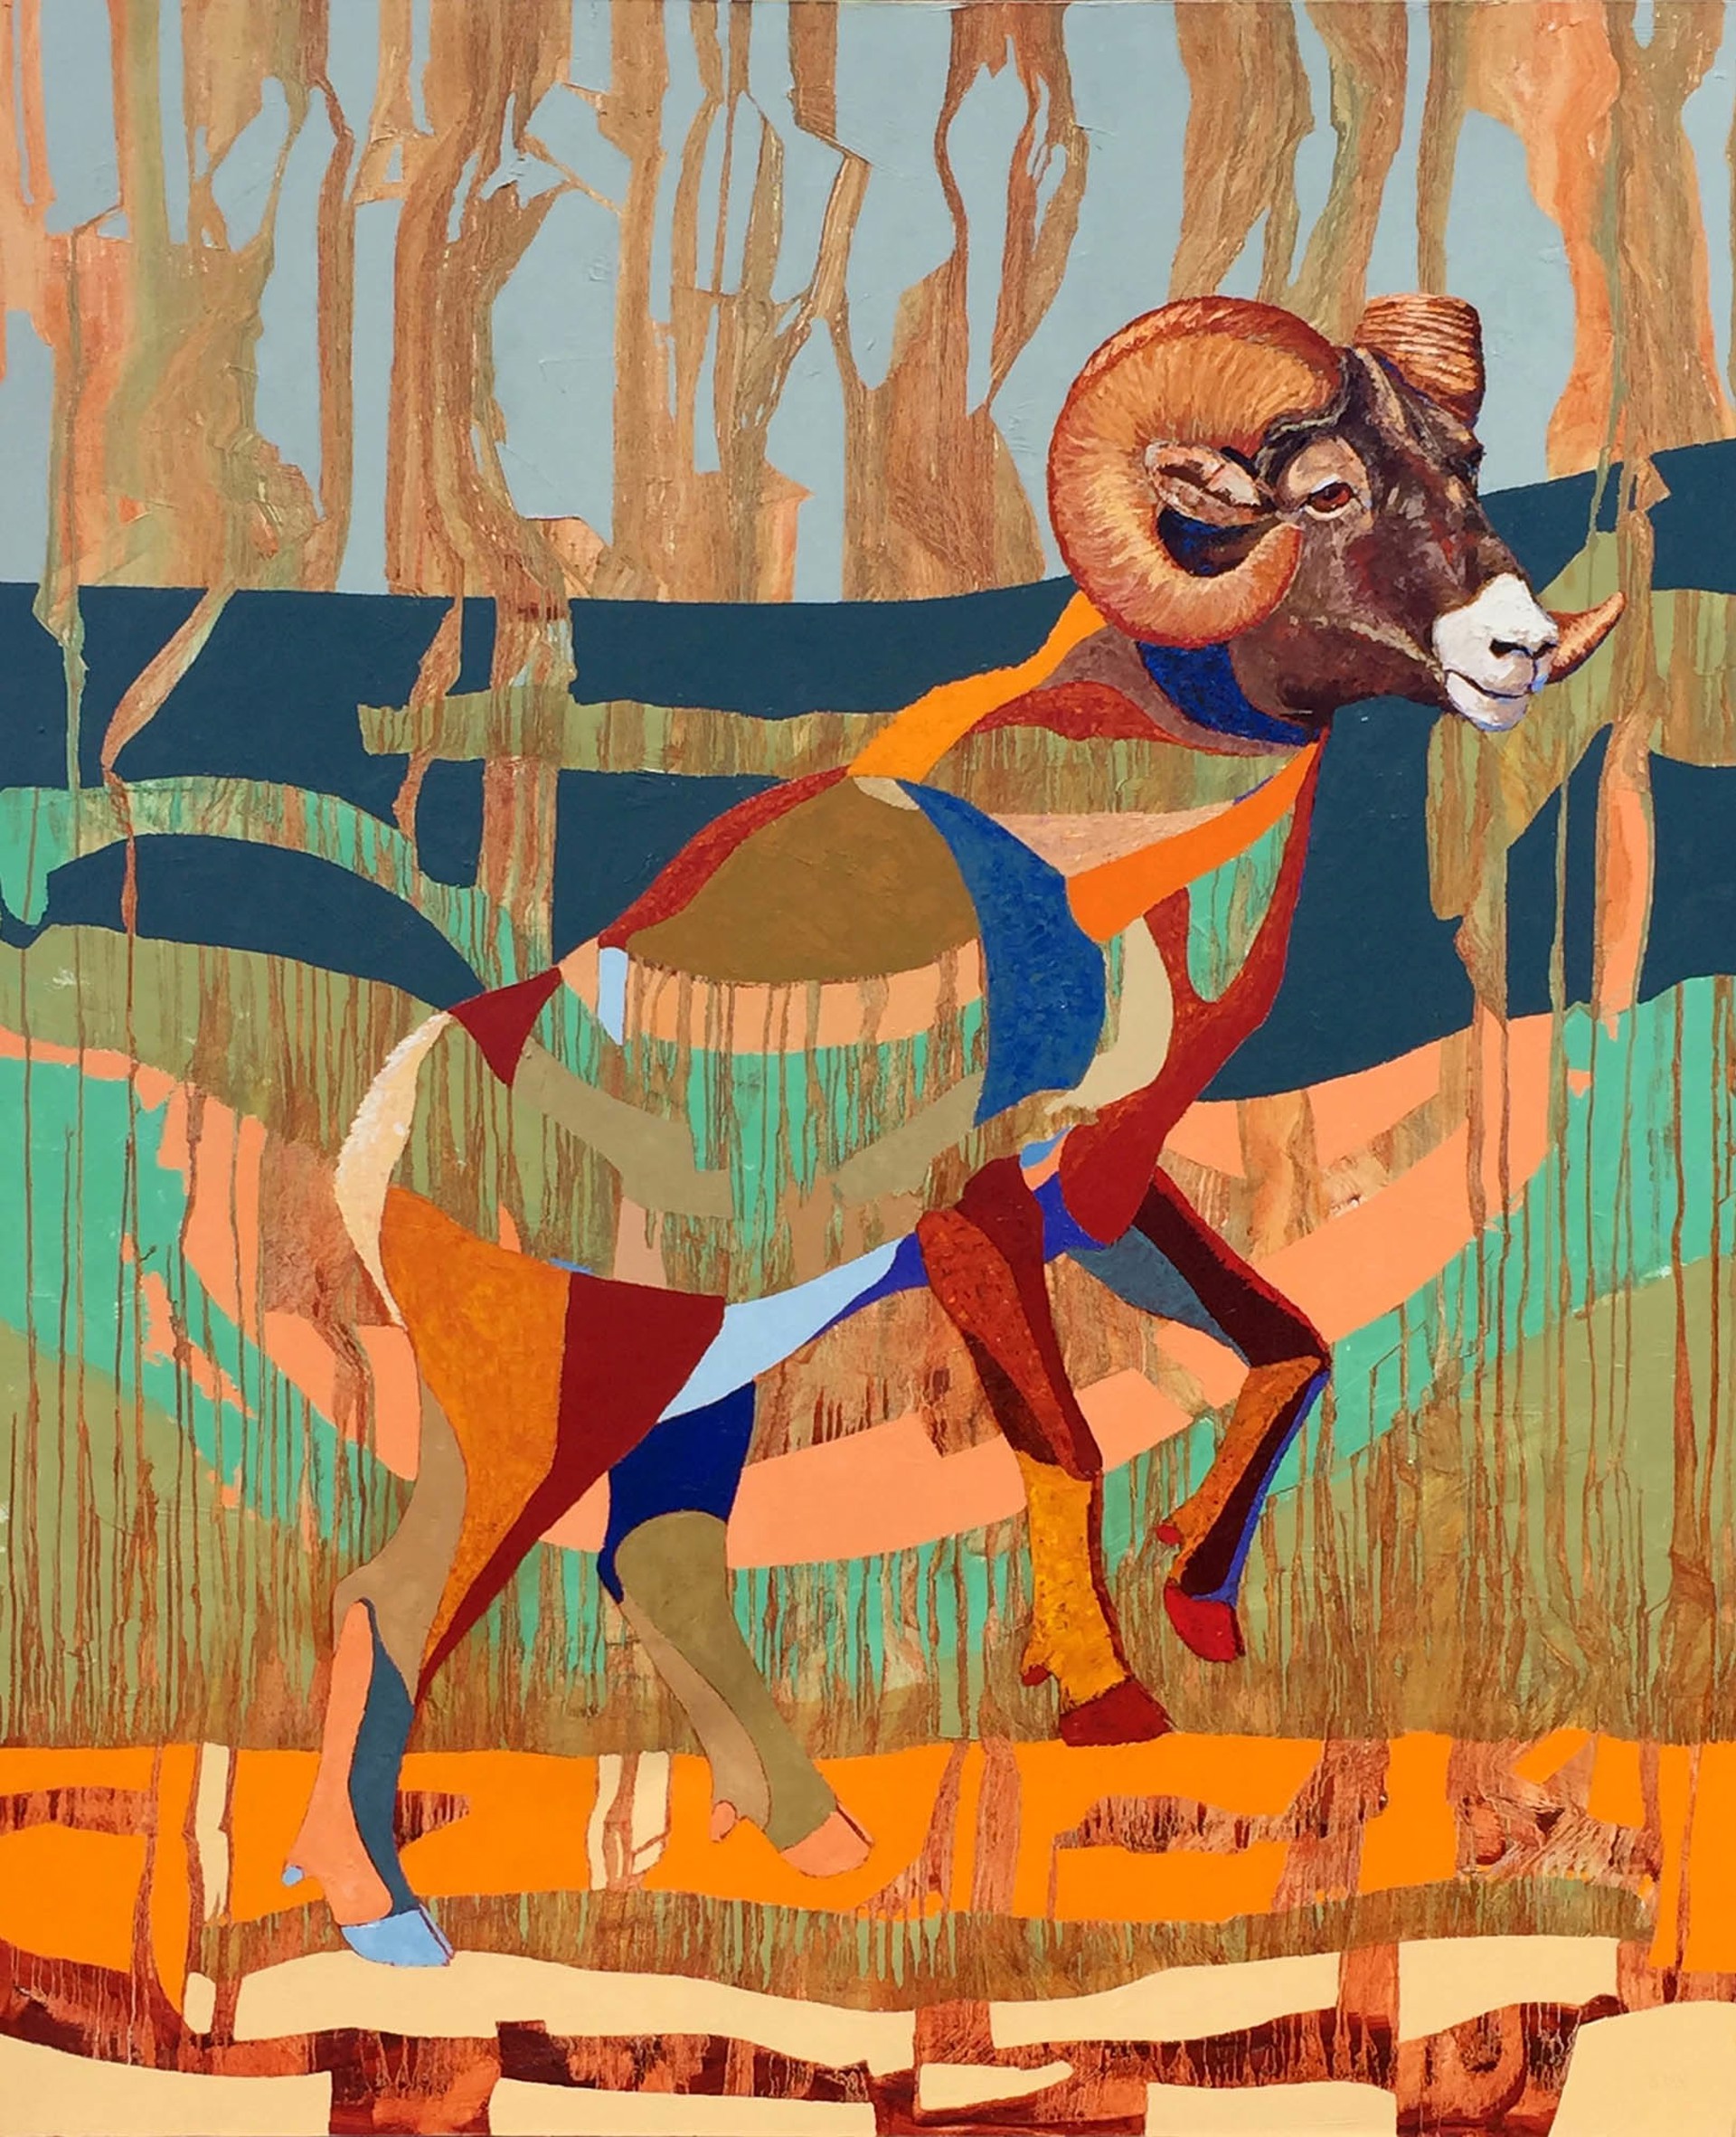 Original Oil Painting Featuring A Bighorn Sheep In A Color Block Graphic Style